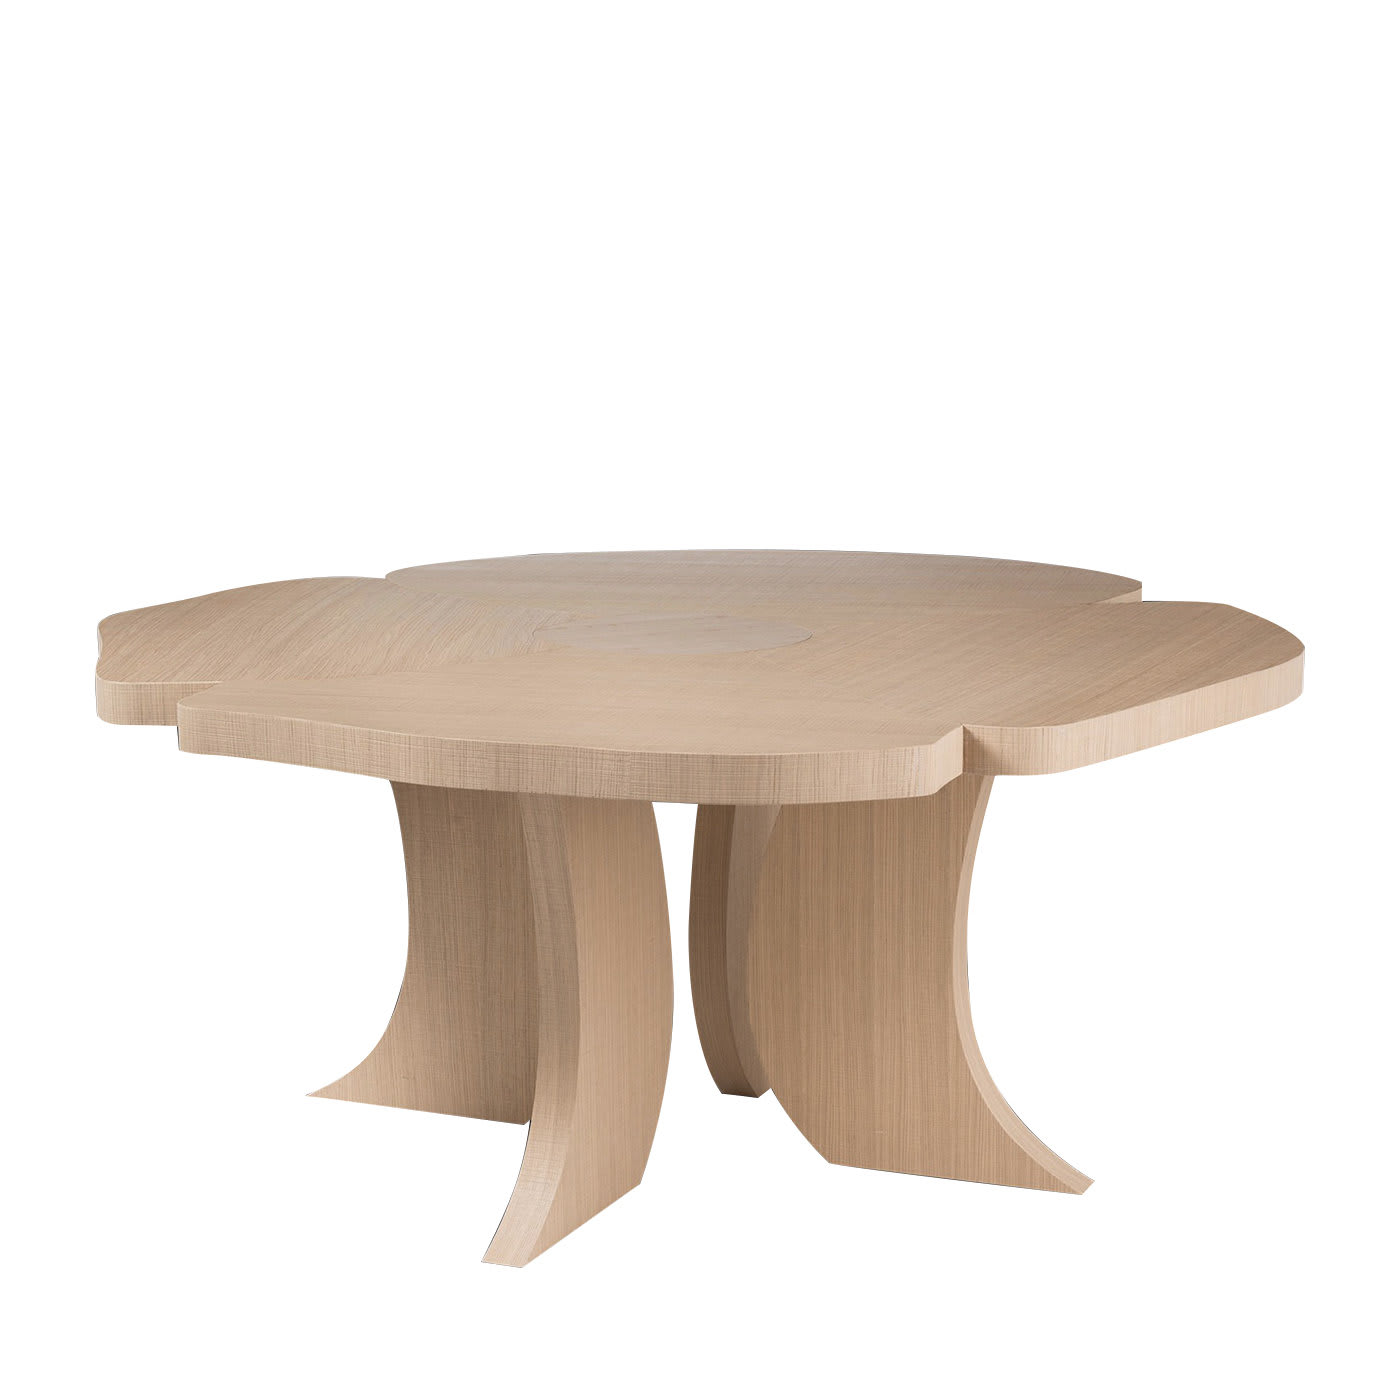 Andy Natural Dining Table - VGnewtrend